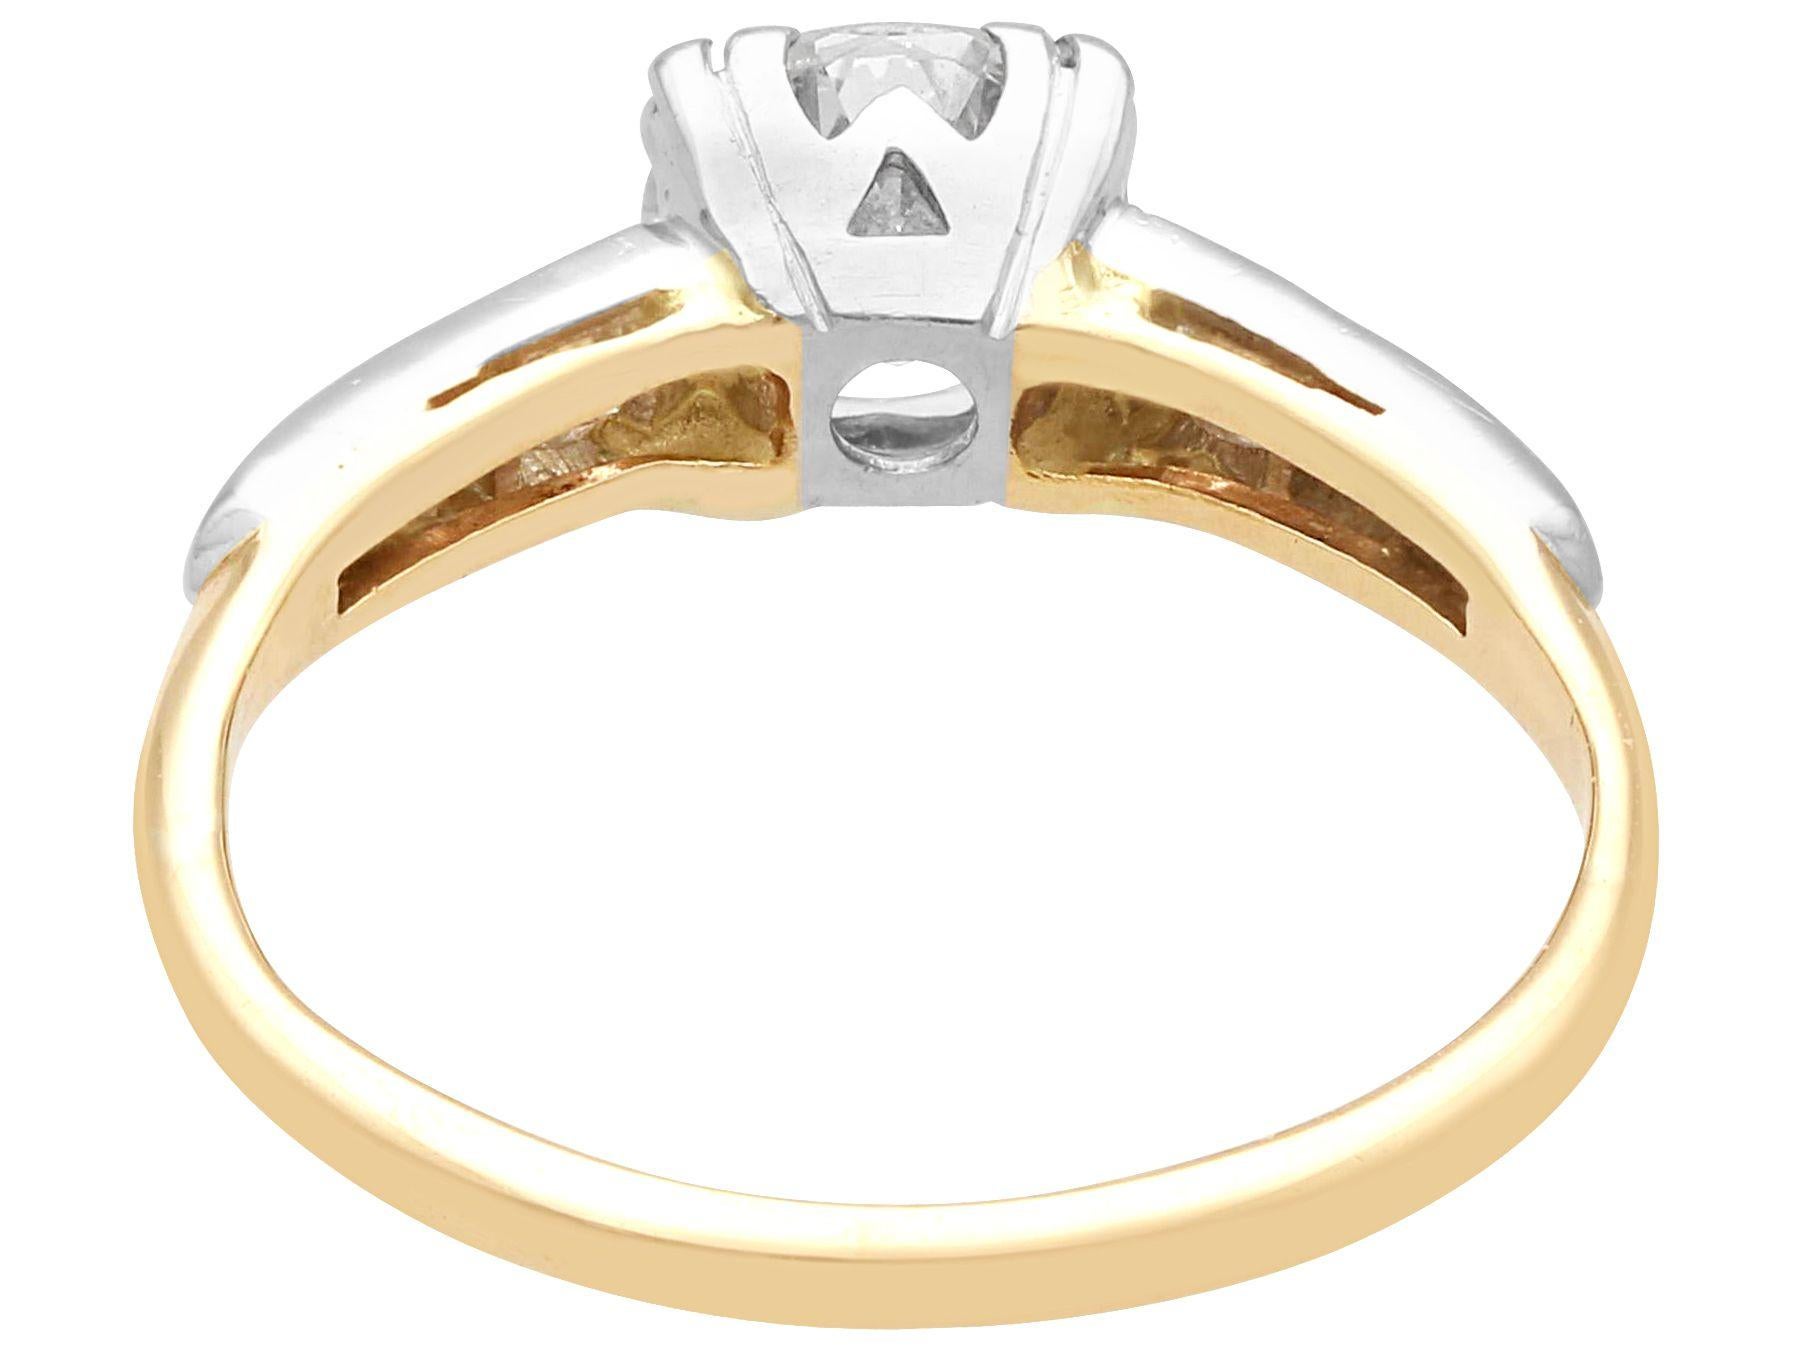 Antique 1.18 Carat Diamond and Yellow Gold Solitaire Ring In Excellent Condition For Sale In Jesmond, Newcastle Upon Tyne